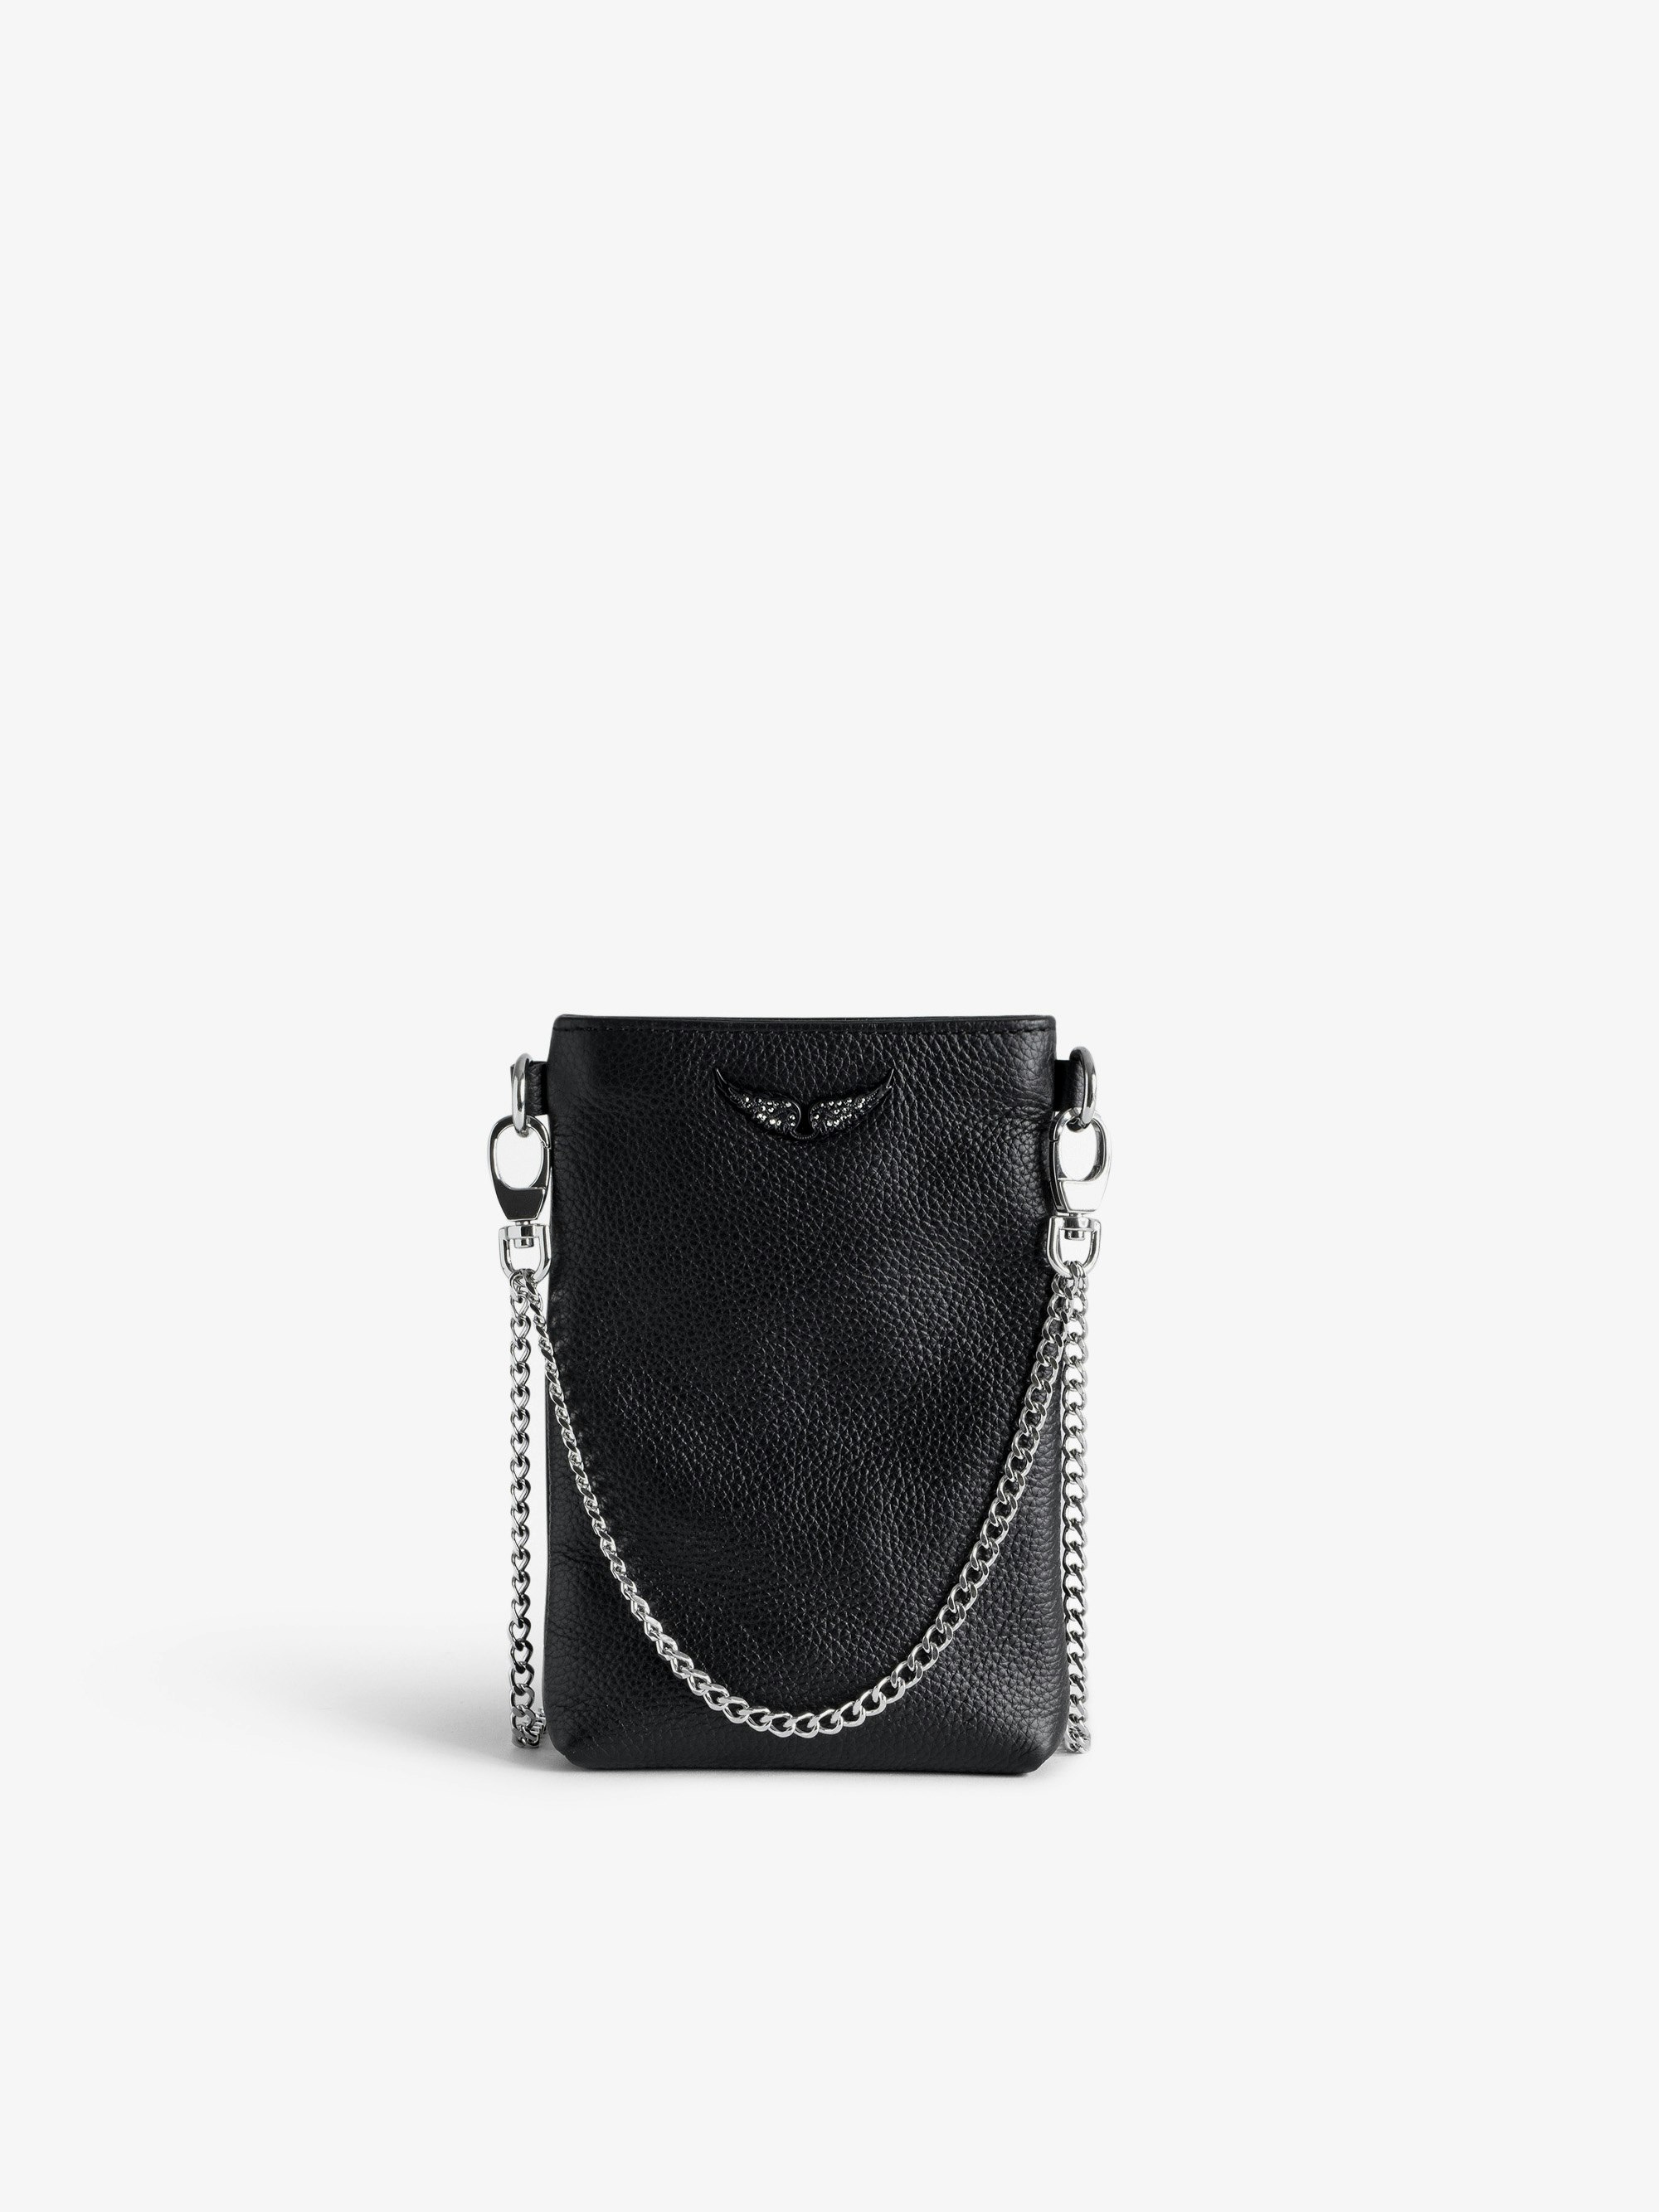 Rock Phone Pouch Clutch - Women’s black grained leather phone pouch with chains and diamanté wings charm.